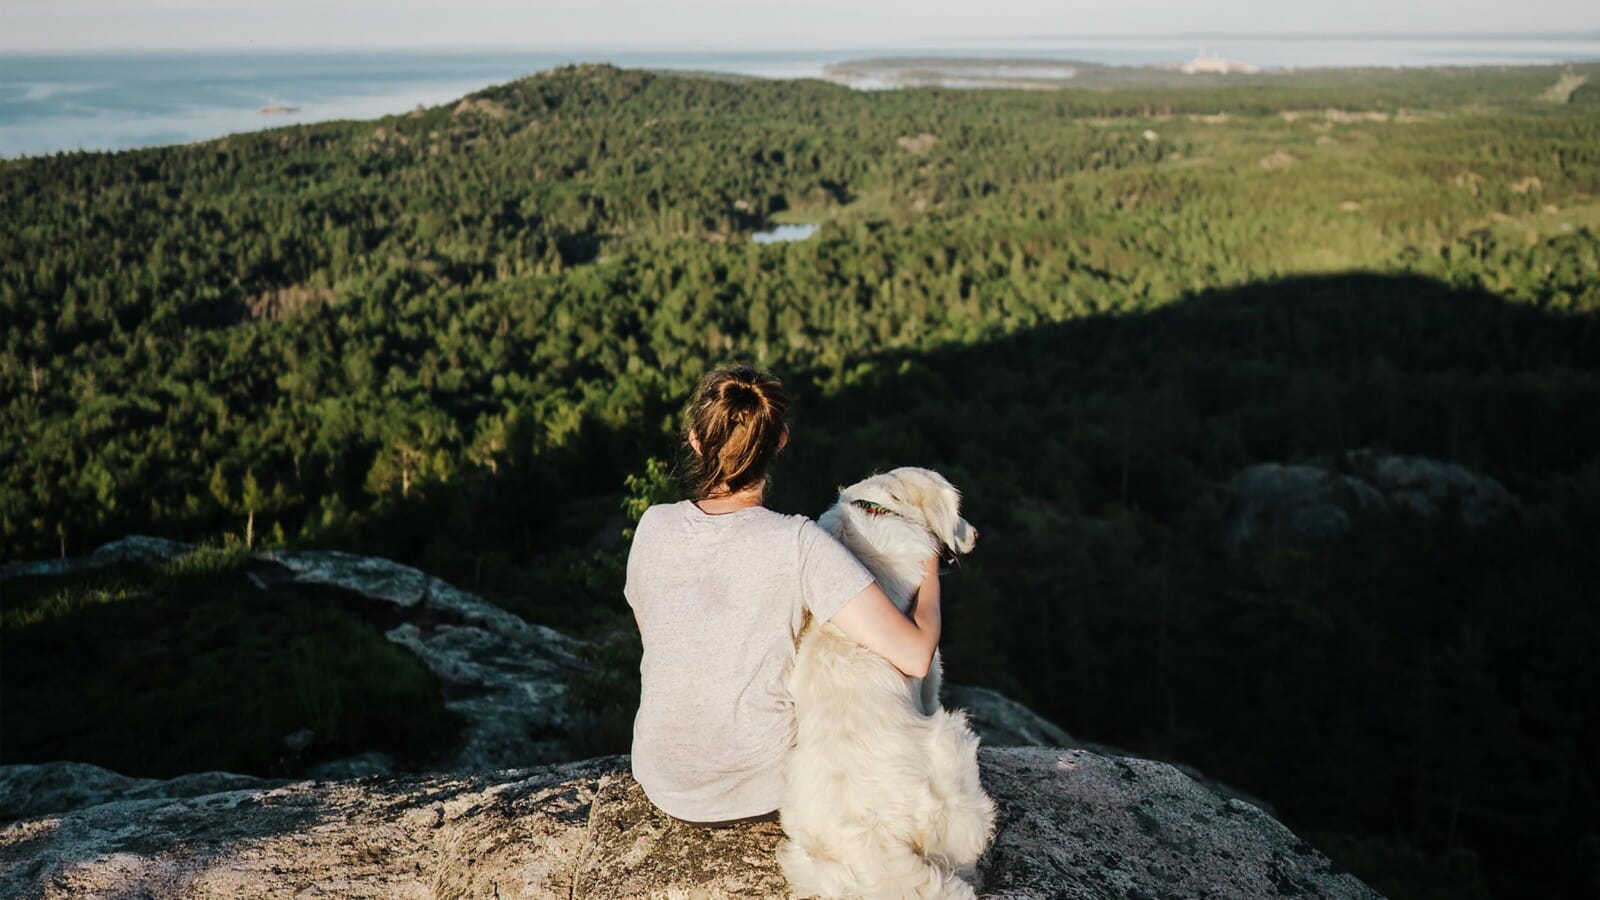 A woman and her dog sitting on a rock with a view of trees and water